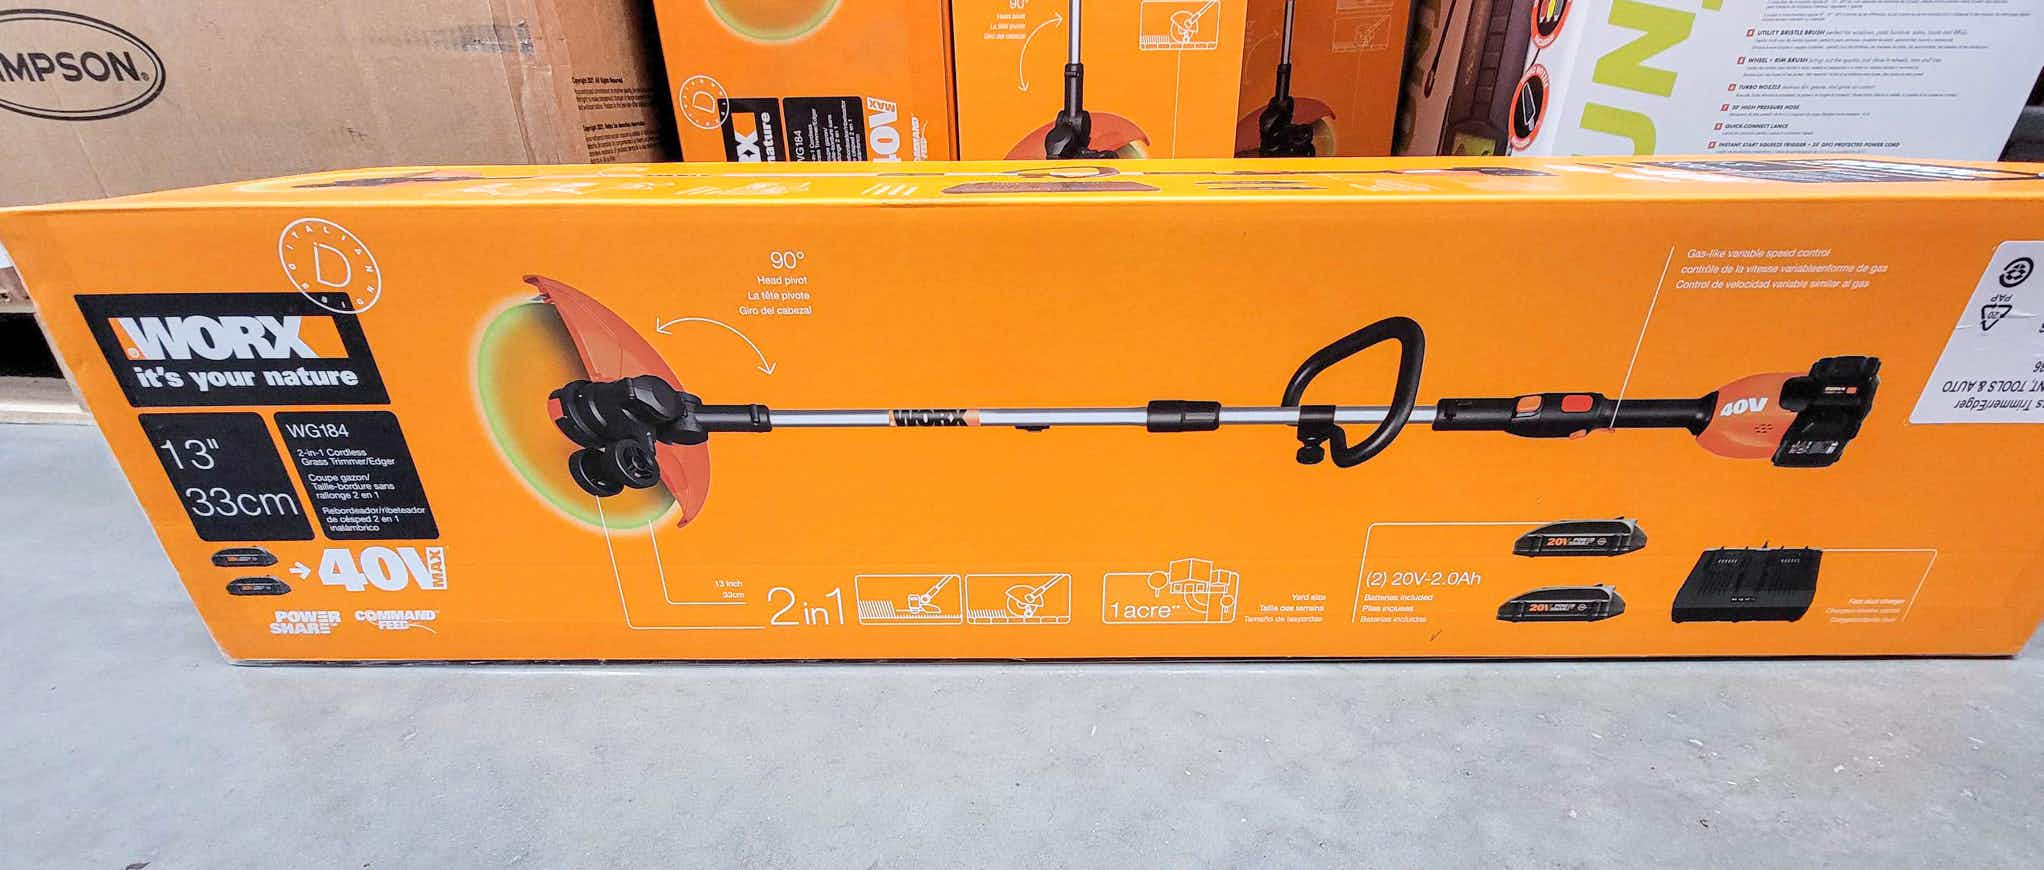 worx brand weed eater in the box